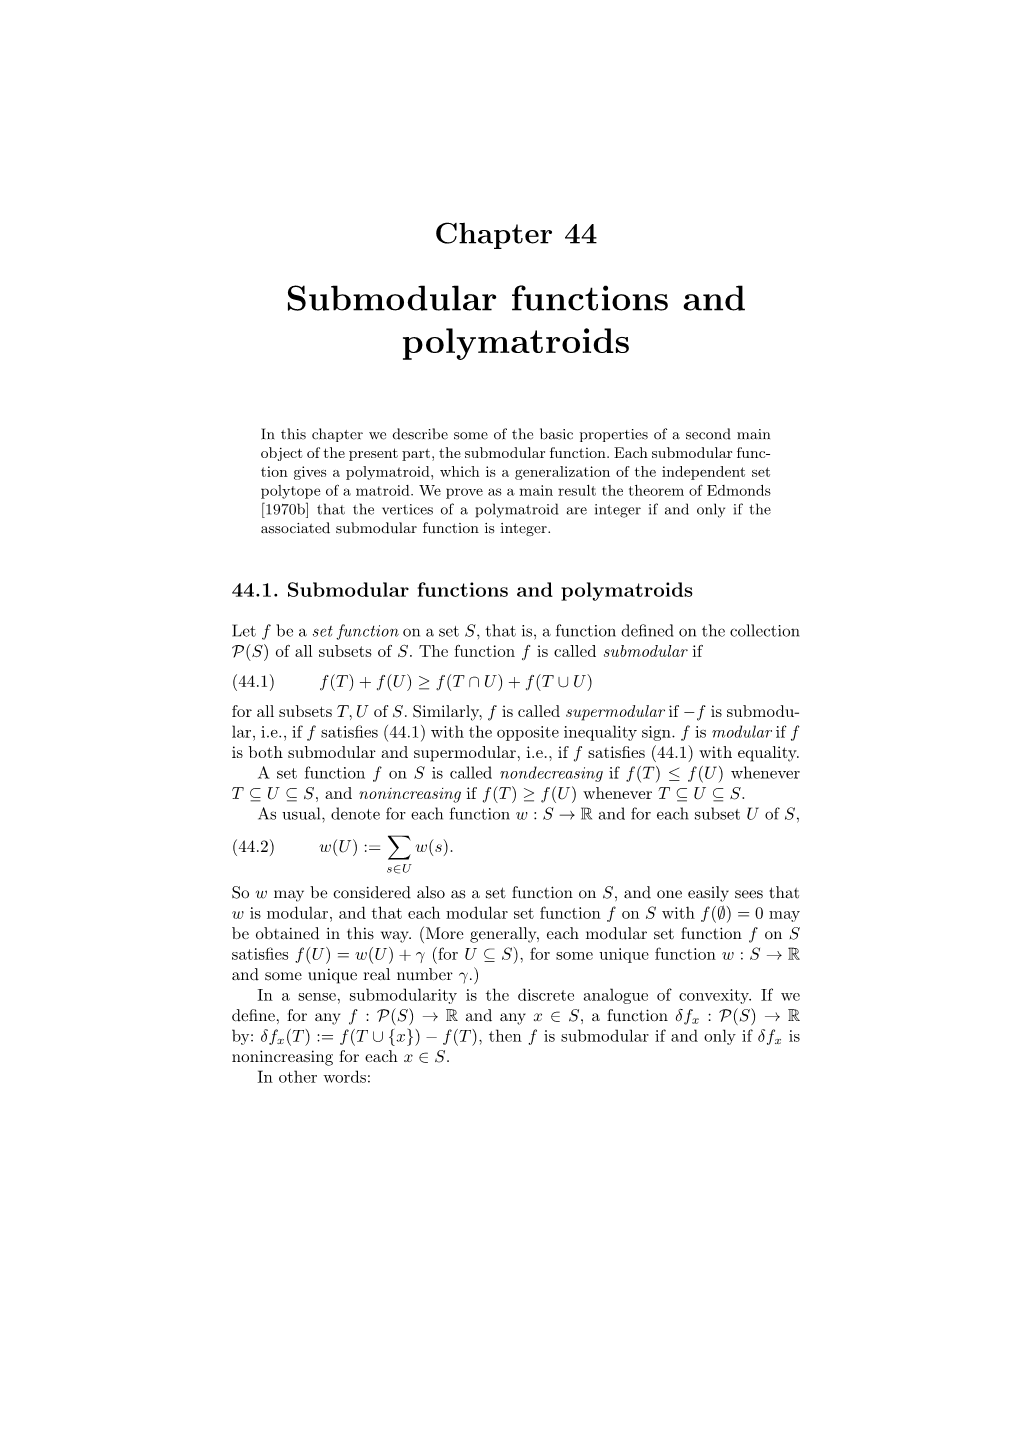 Submodular Functions and Polymatroids